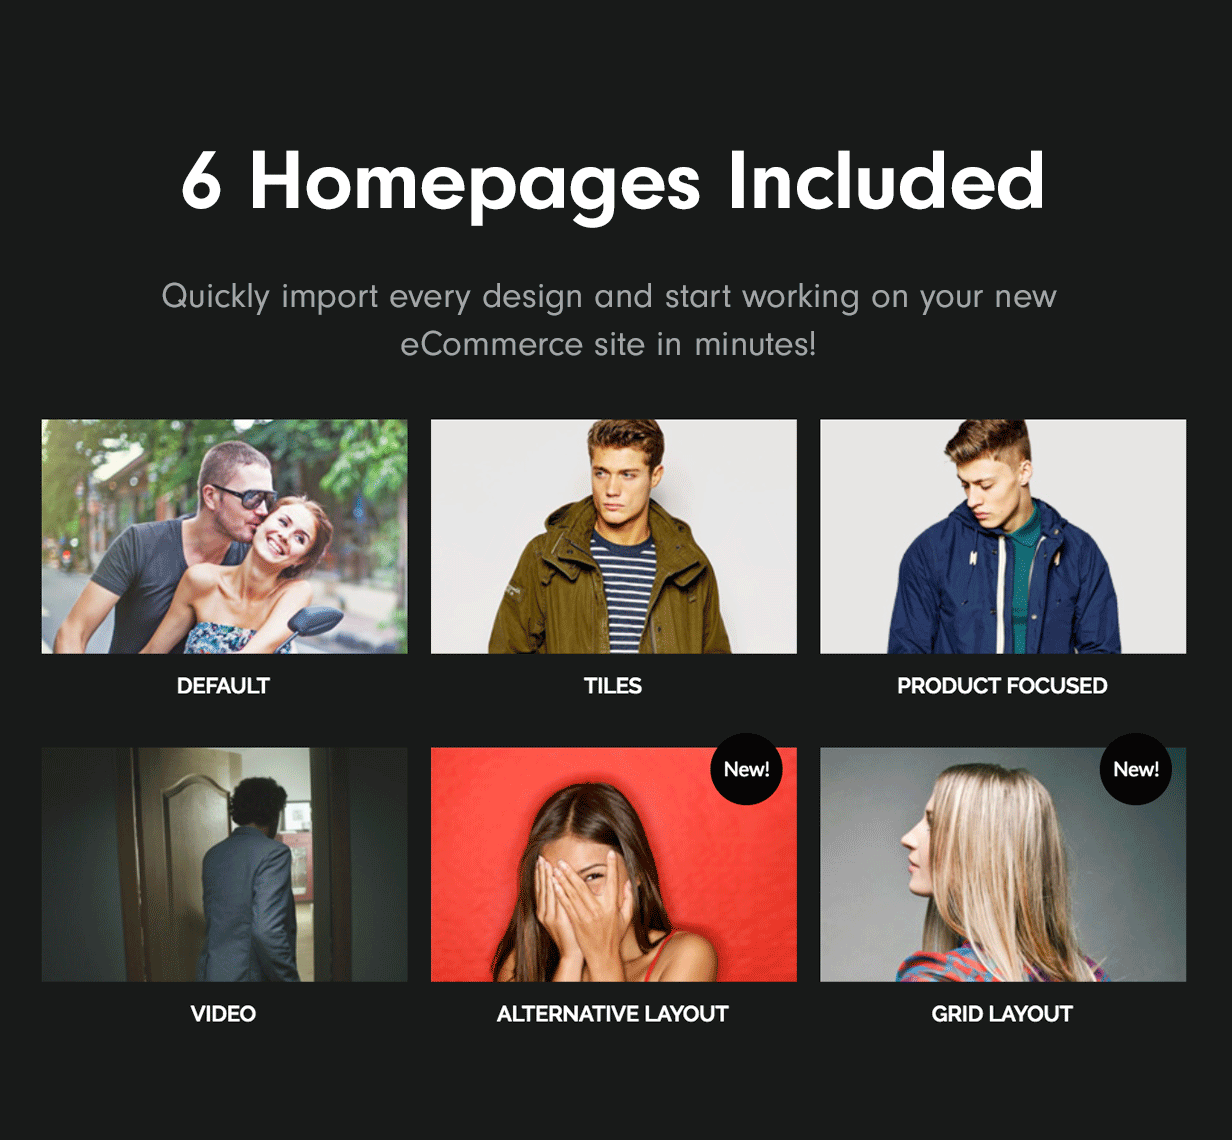 6 Homepages